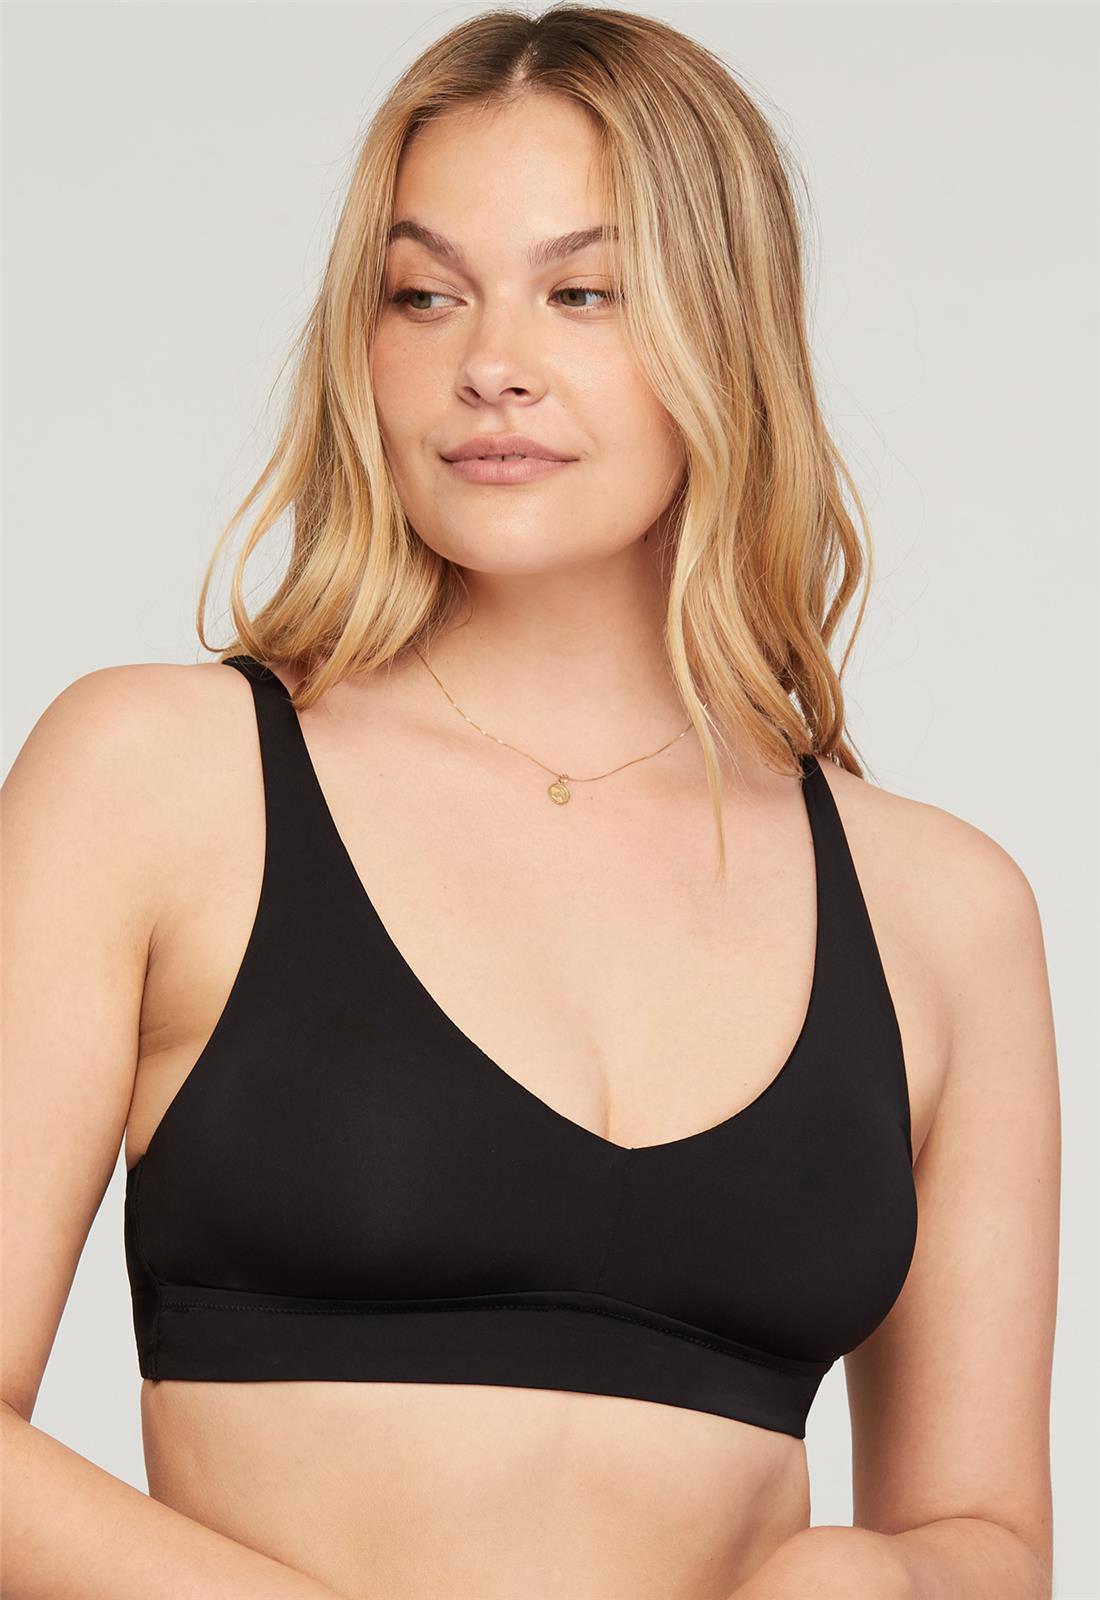 Mysa Cup-Sized Bralette - Black worn by model front view